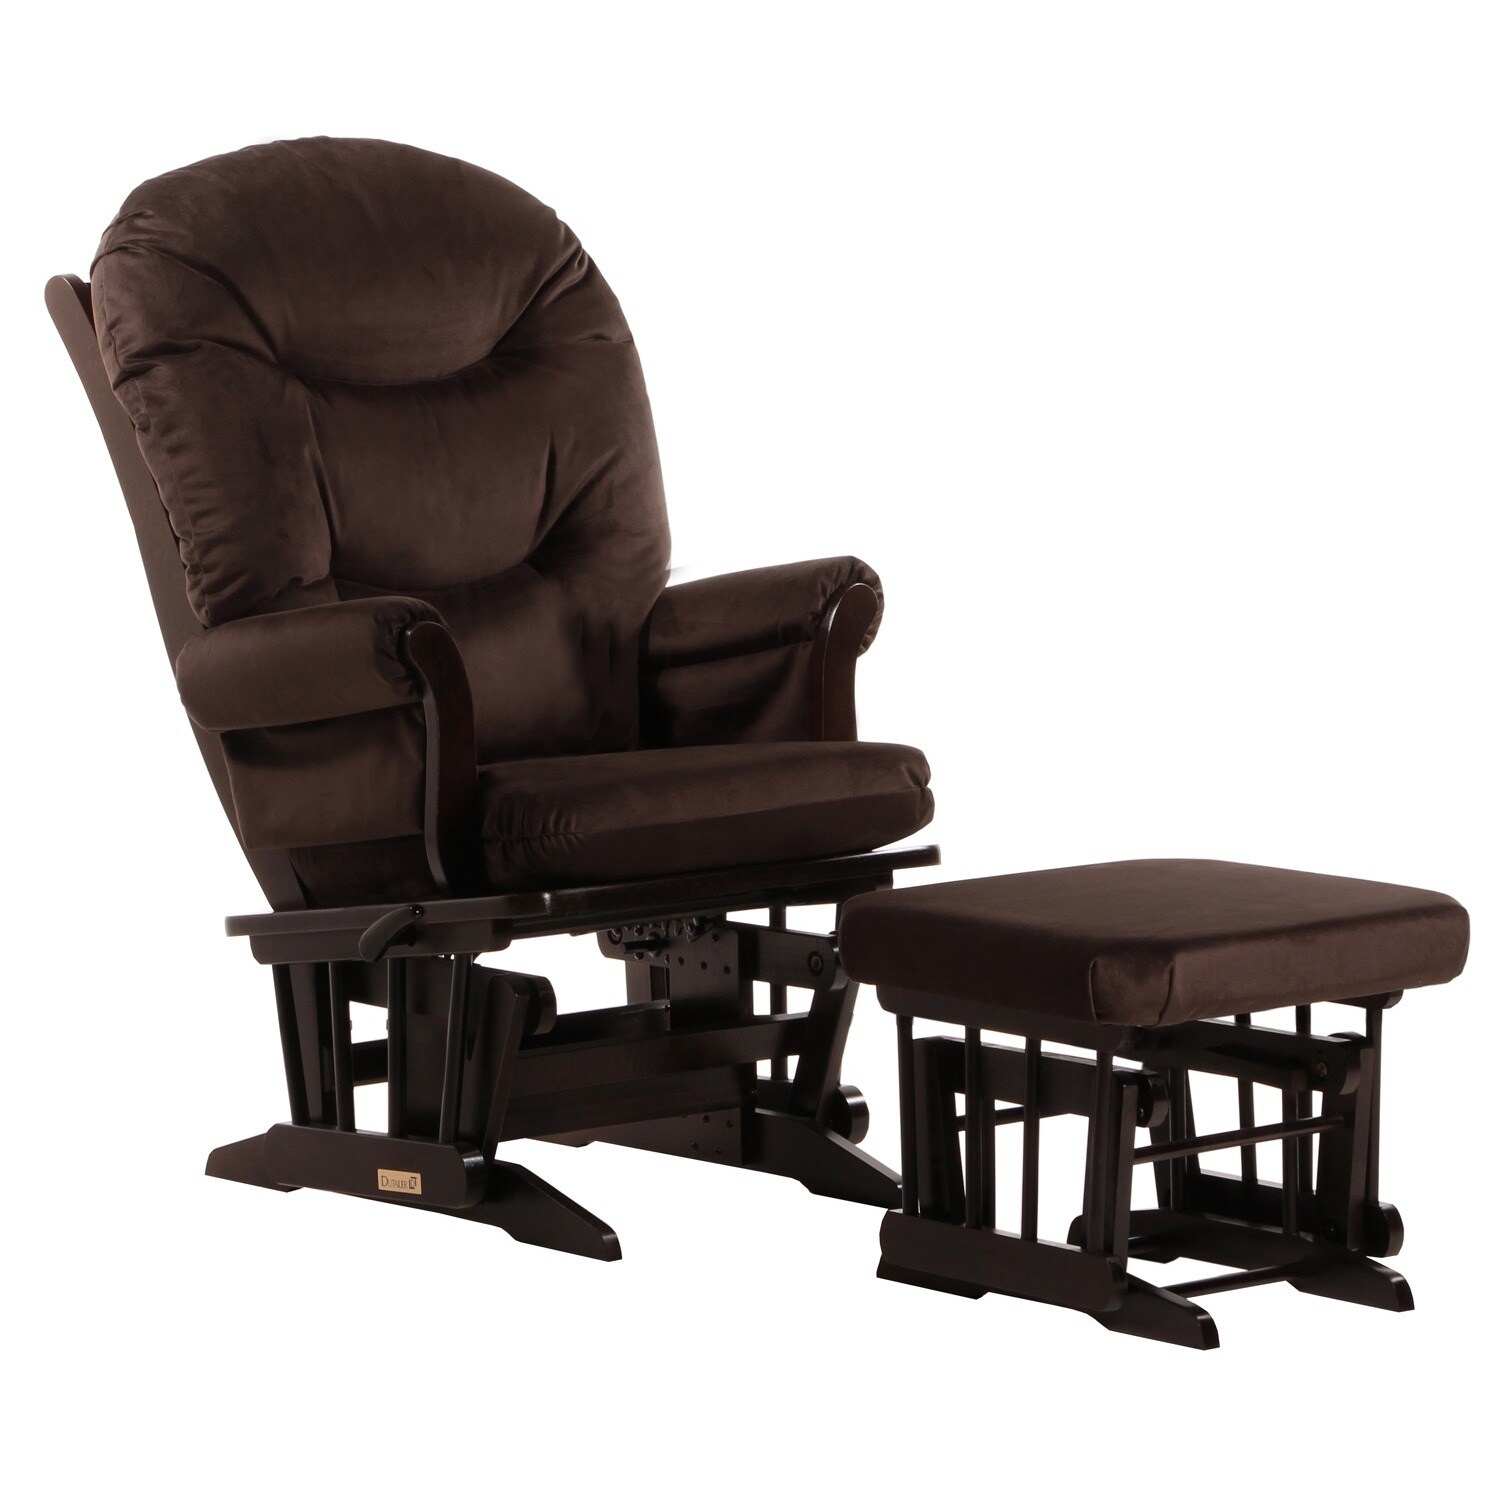 Dutailier Ultramotion Hardwood Reclining Glider And Ottoman